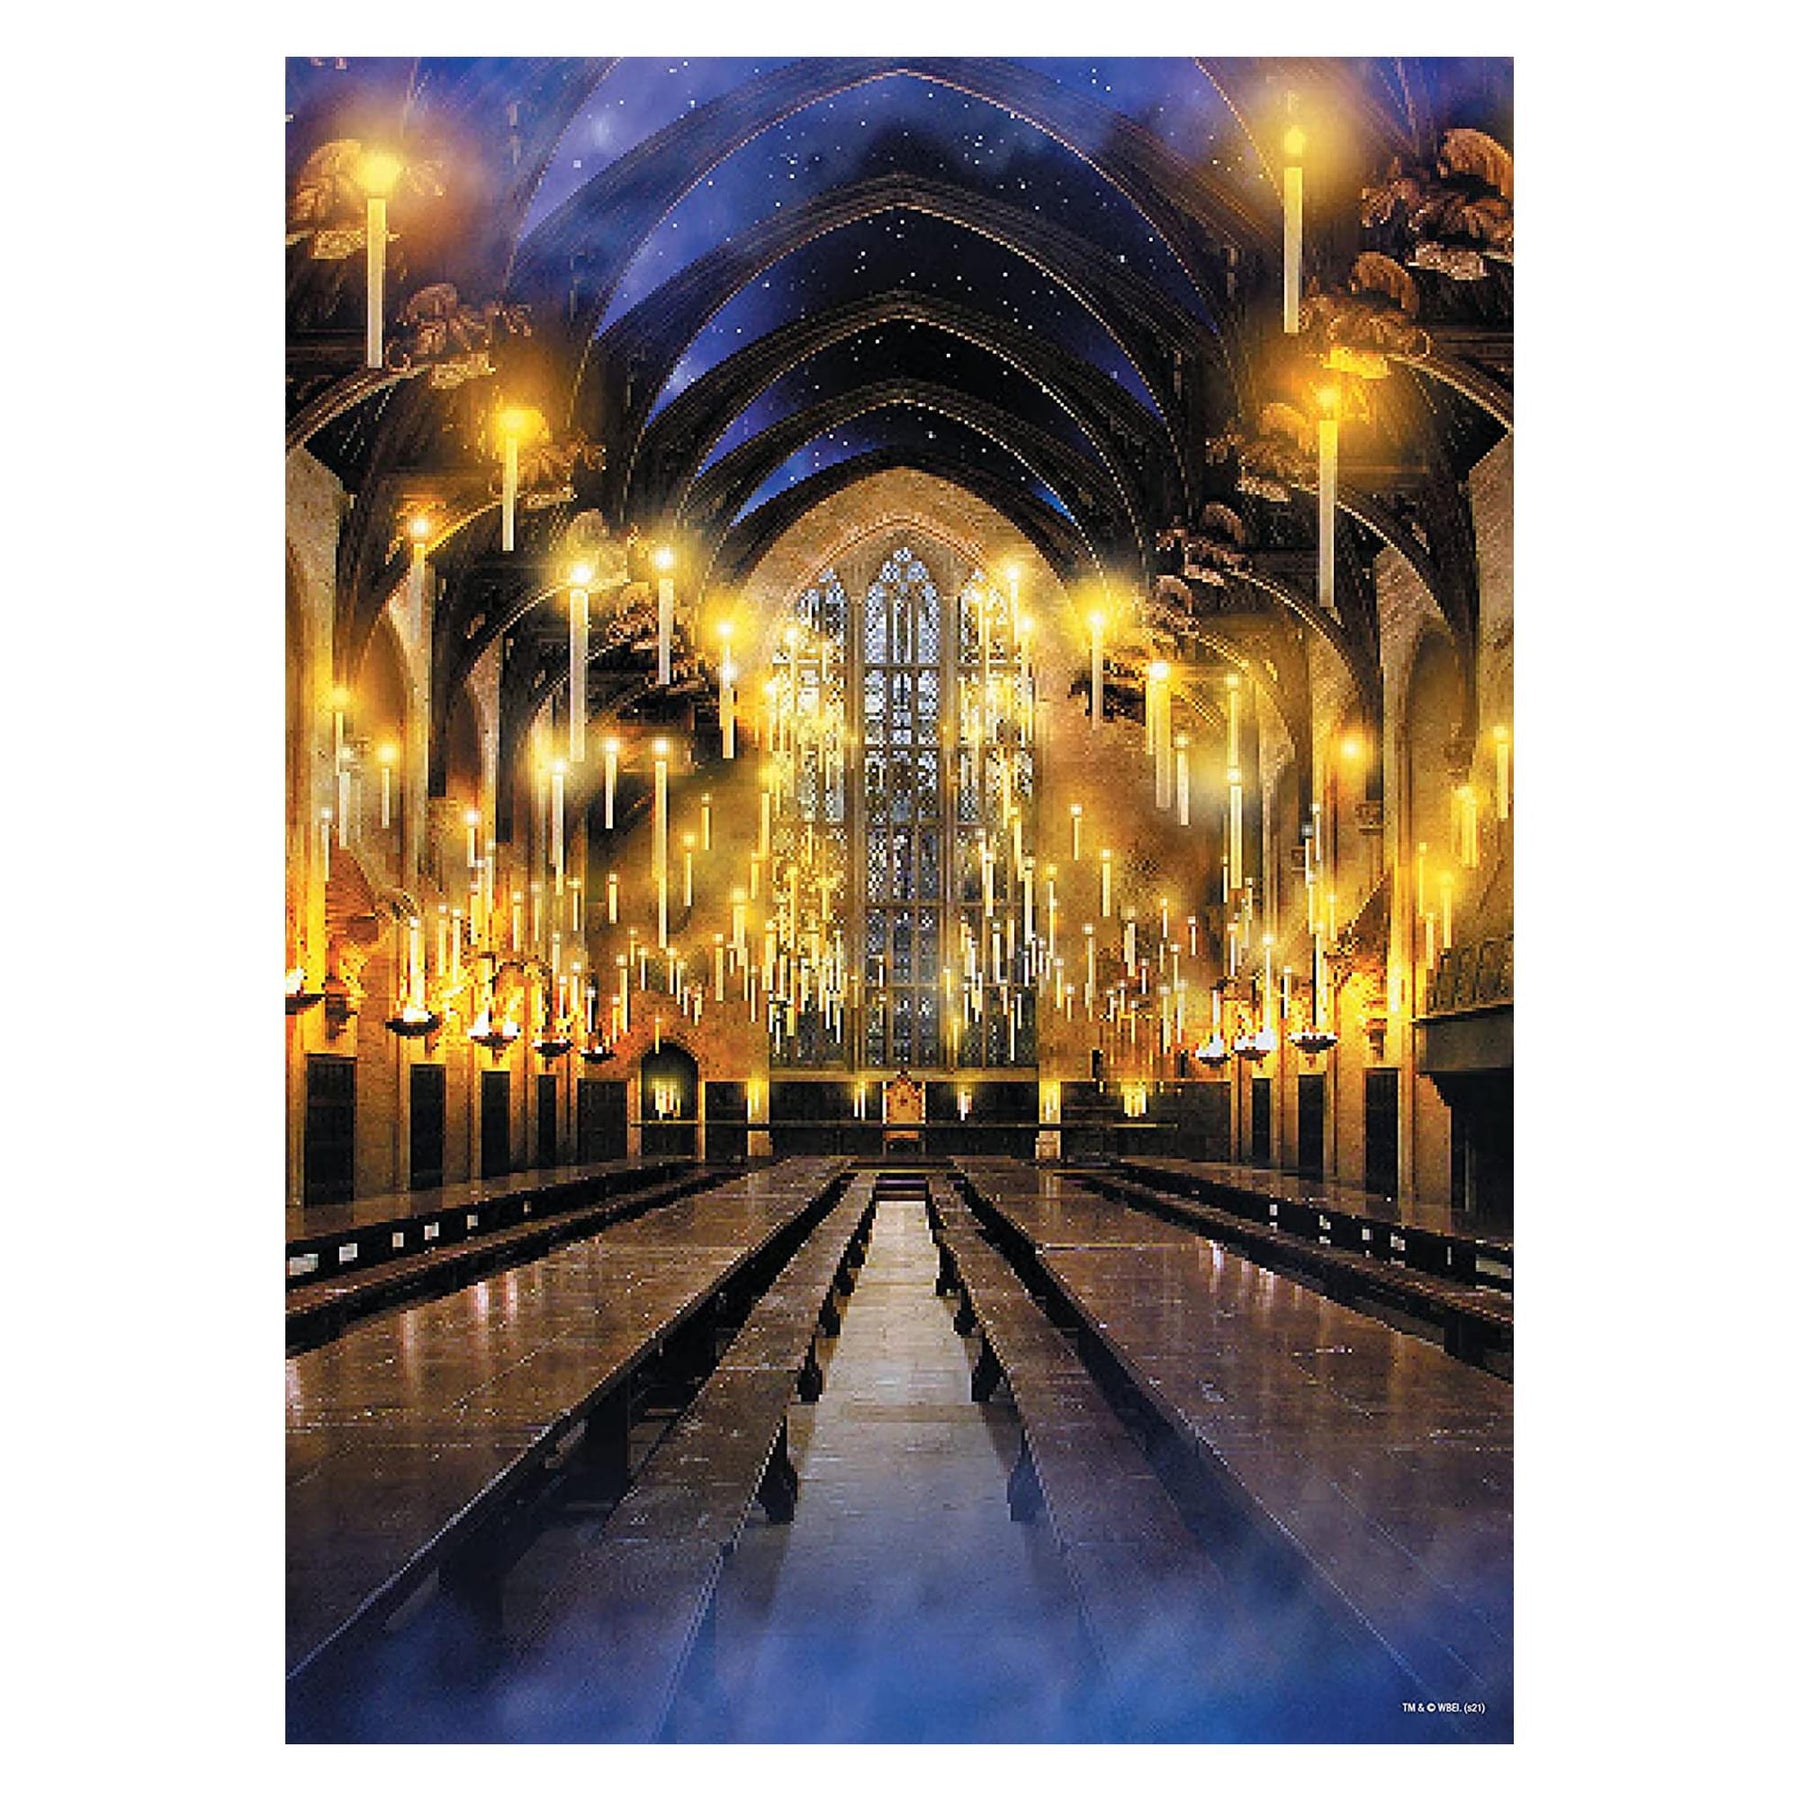 Harry Potter Great Hall 1000 Piece Jigsaw Puzzle